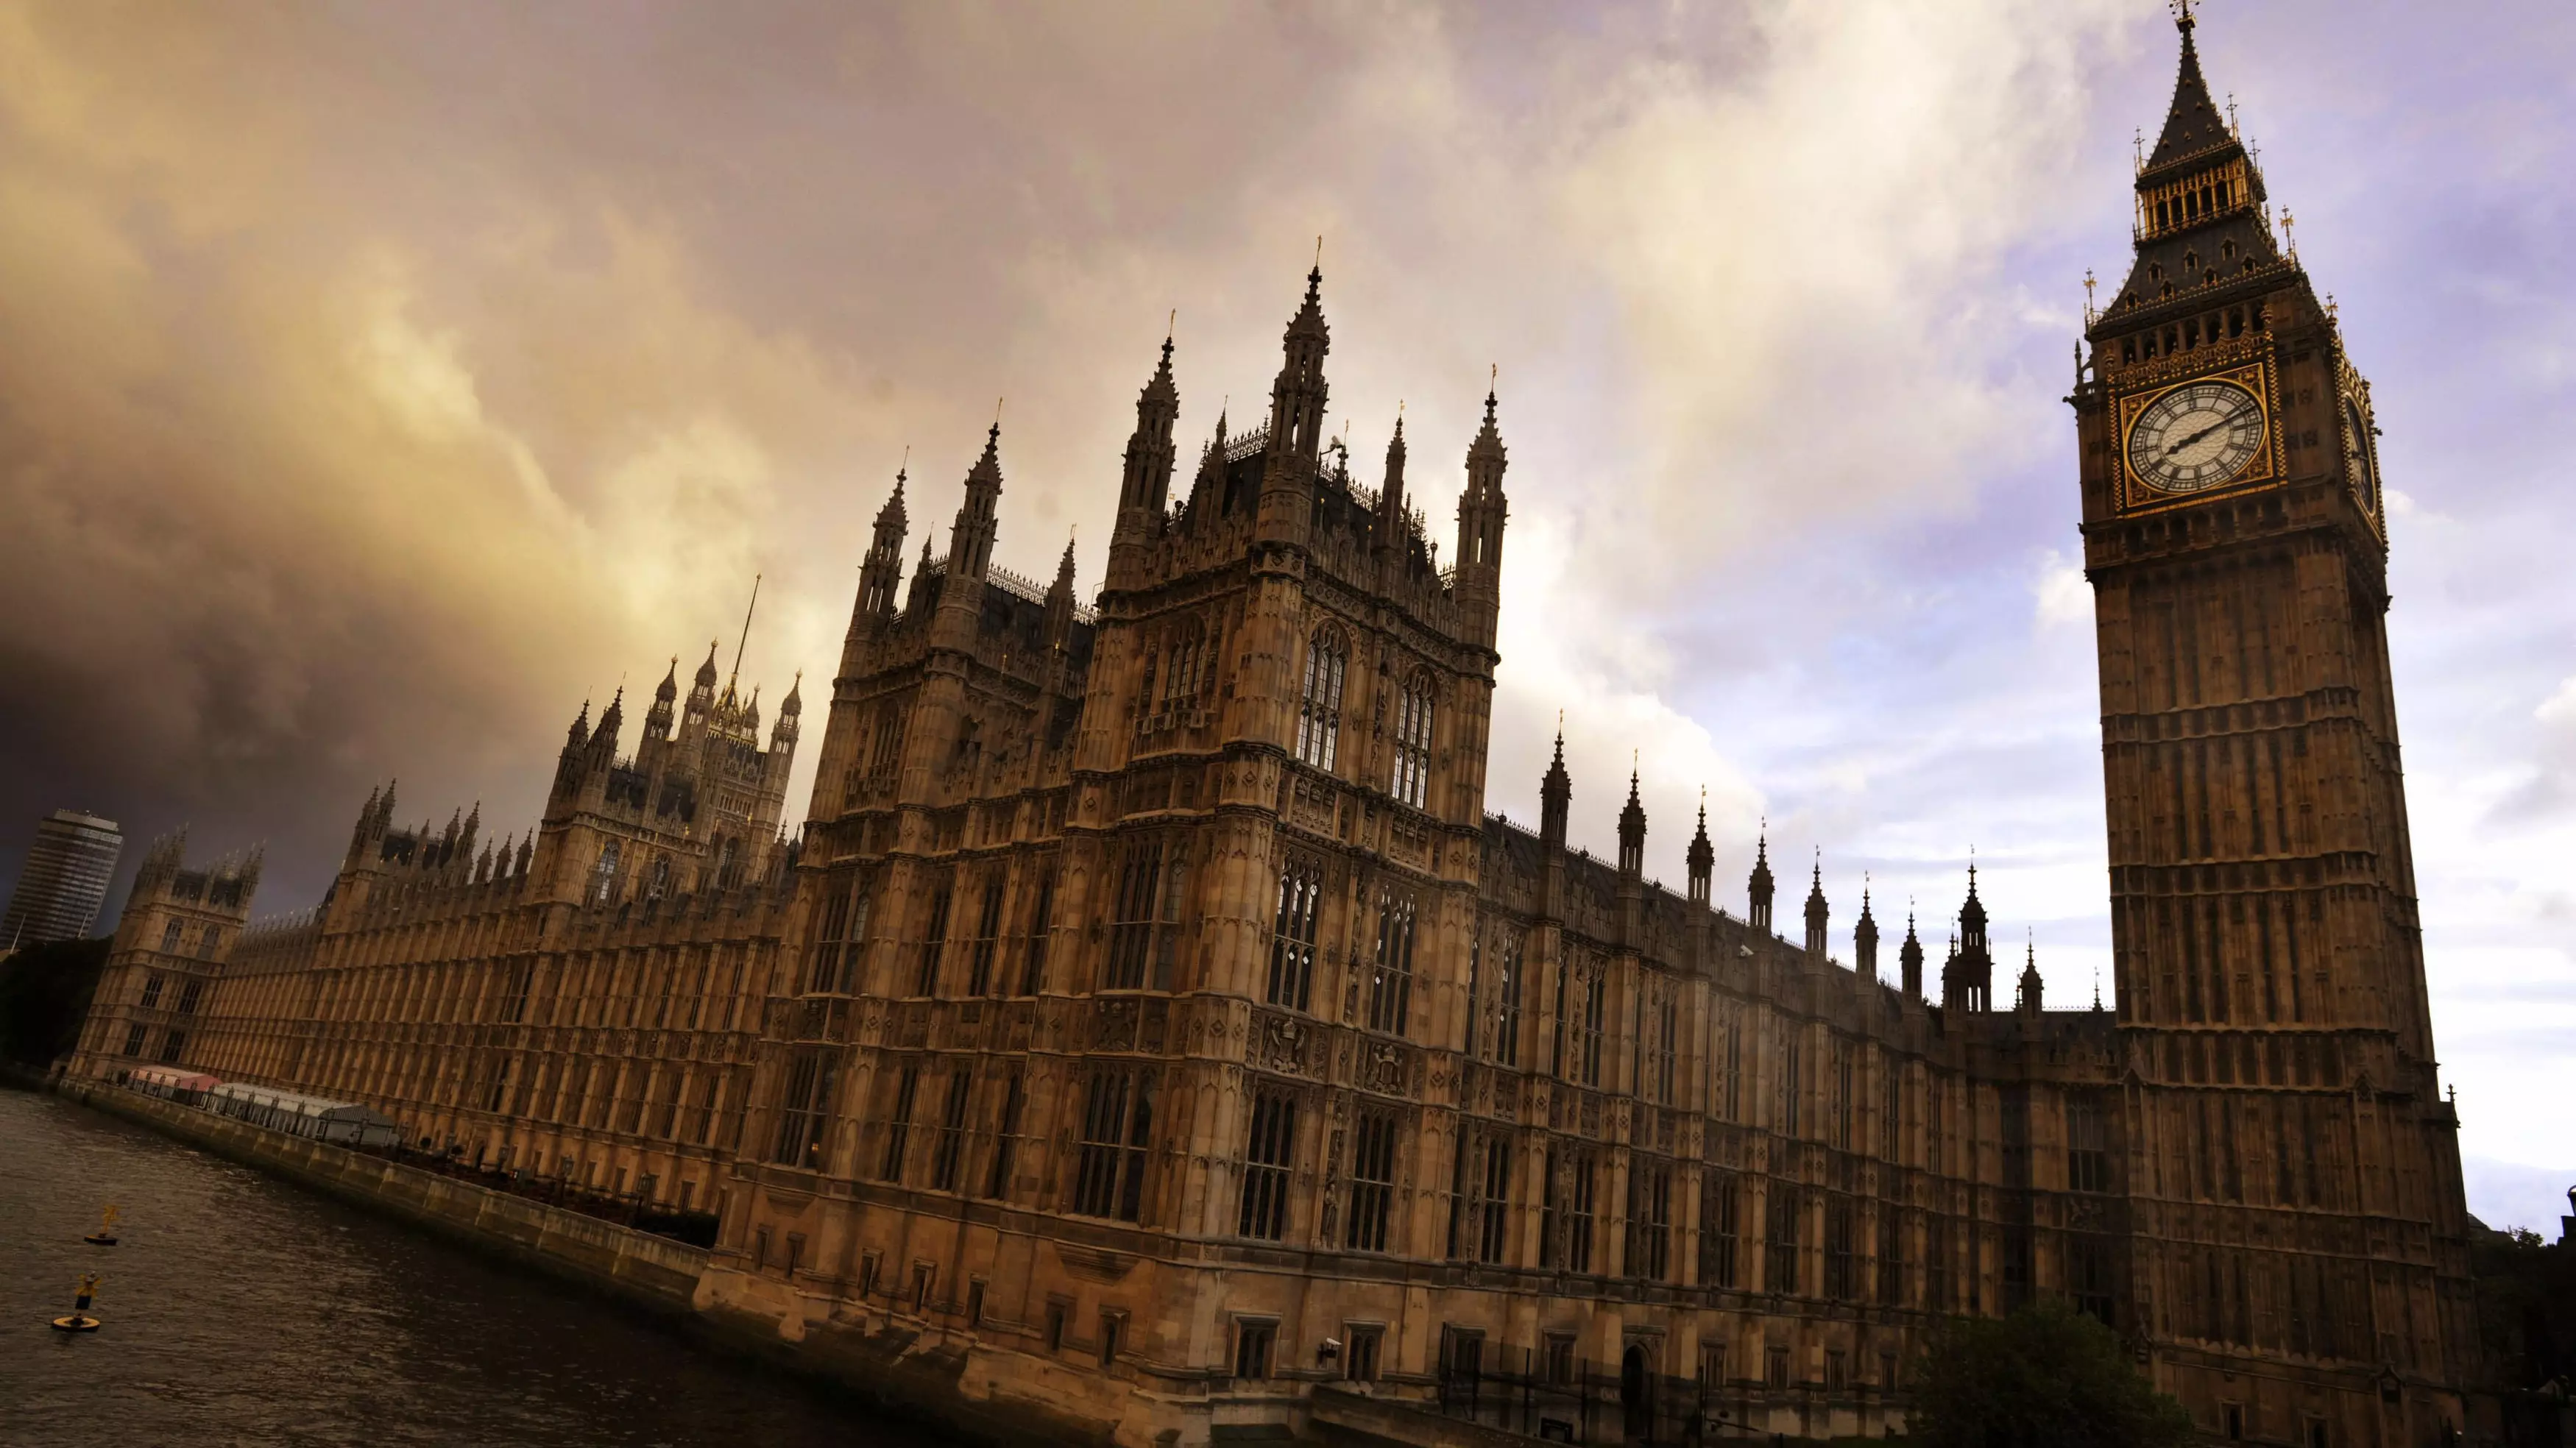 Traces Of Cocaine Found On Samples From The Houses Of Parliament